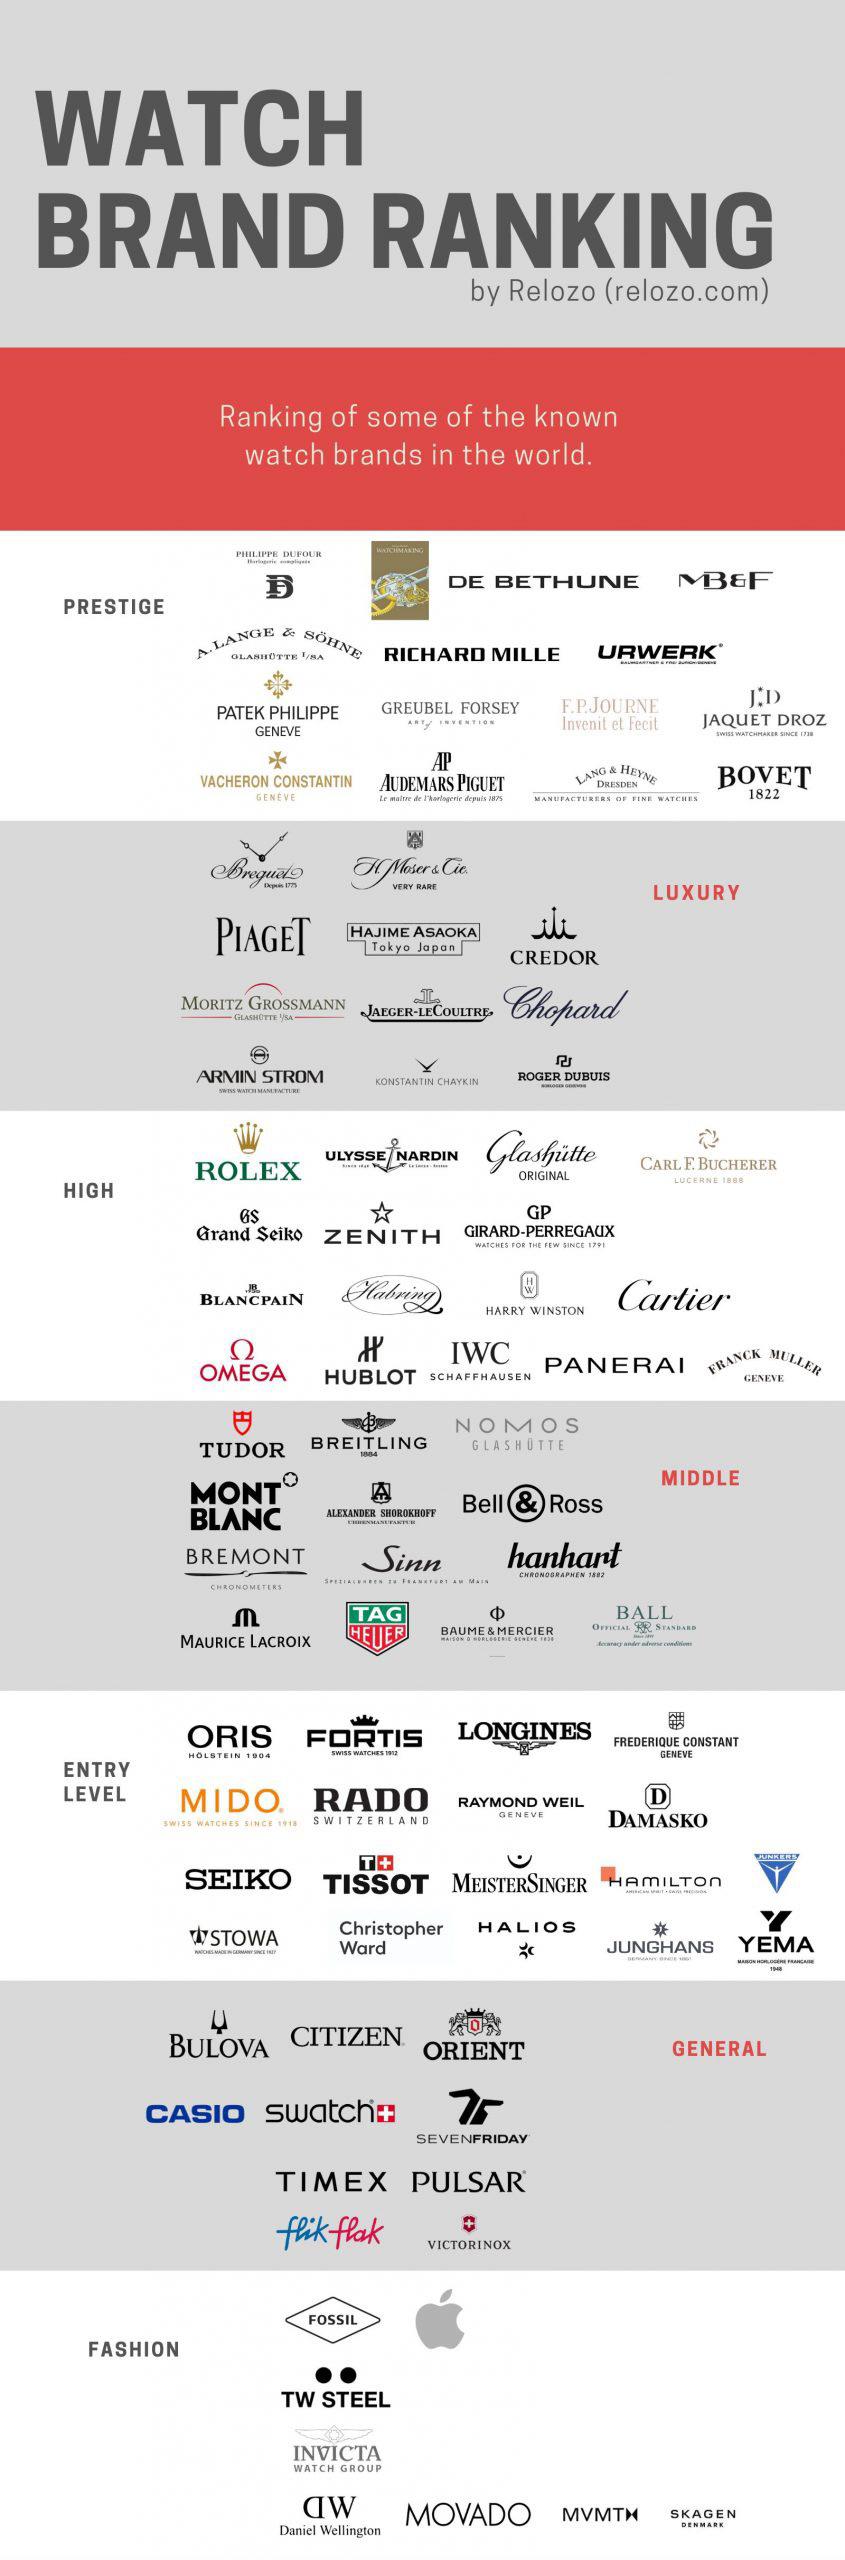 infographics and charts - watch brand hierarchy 2020 - Watch Brand Ranking by Relozo relozo.com Prestige High Entry Level Ranking of some of the known watch brands in the world. Philippe Dufour Halogeri oglige D A.Lange & Fashion Glashtte Sa Patek Philipp